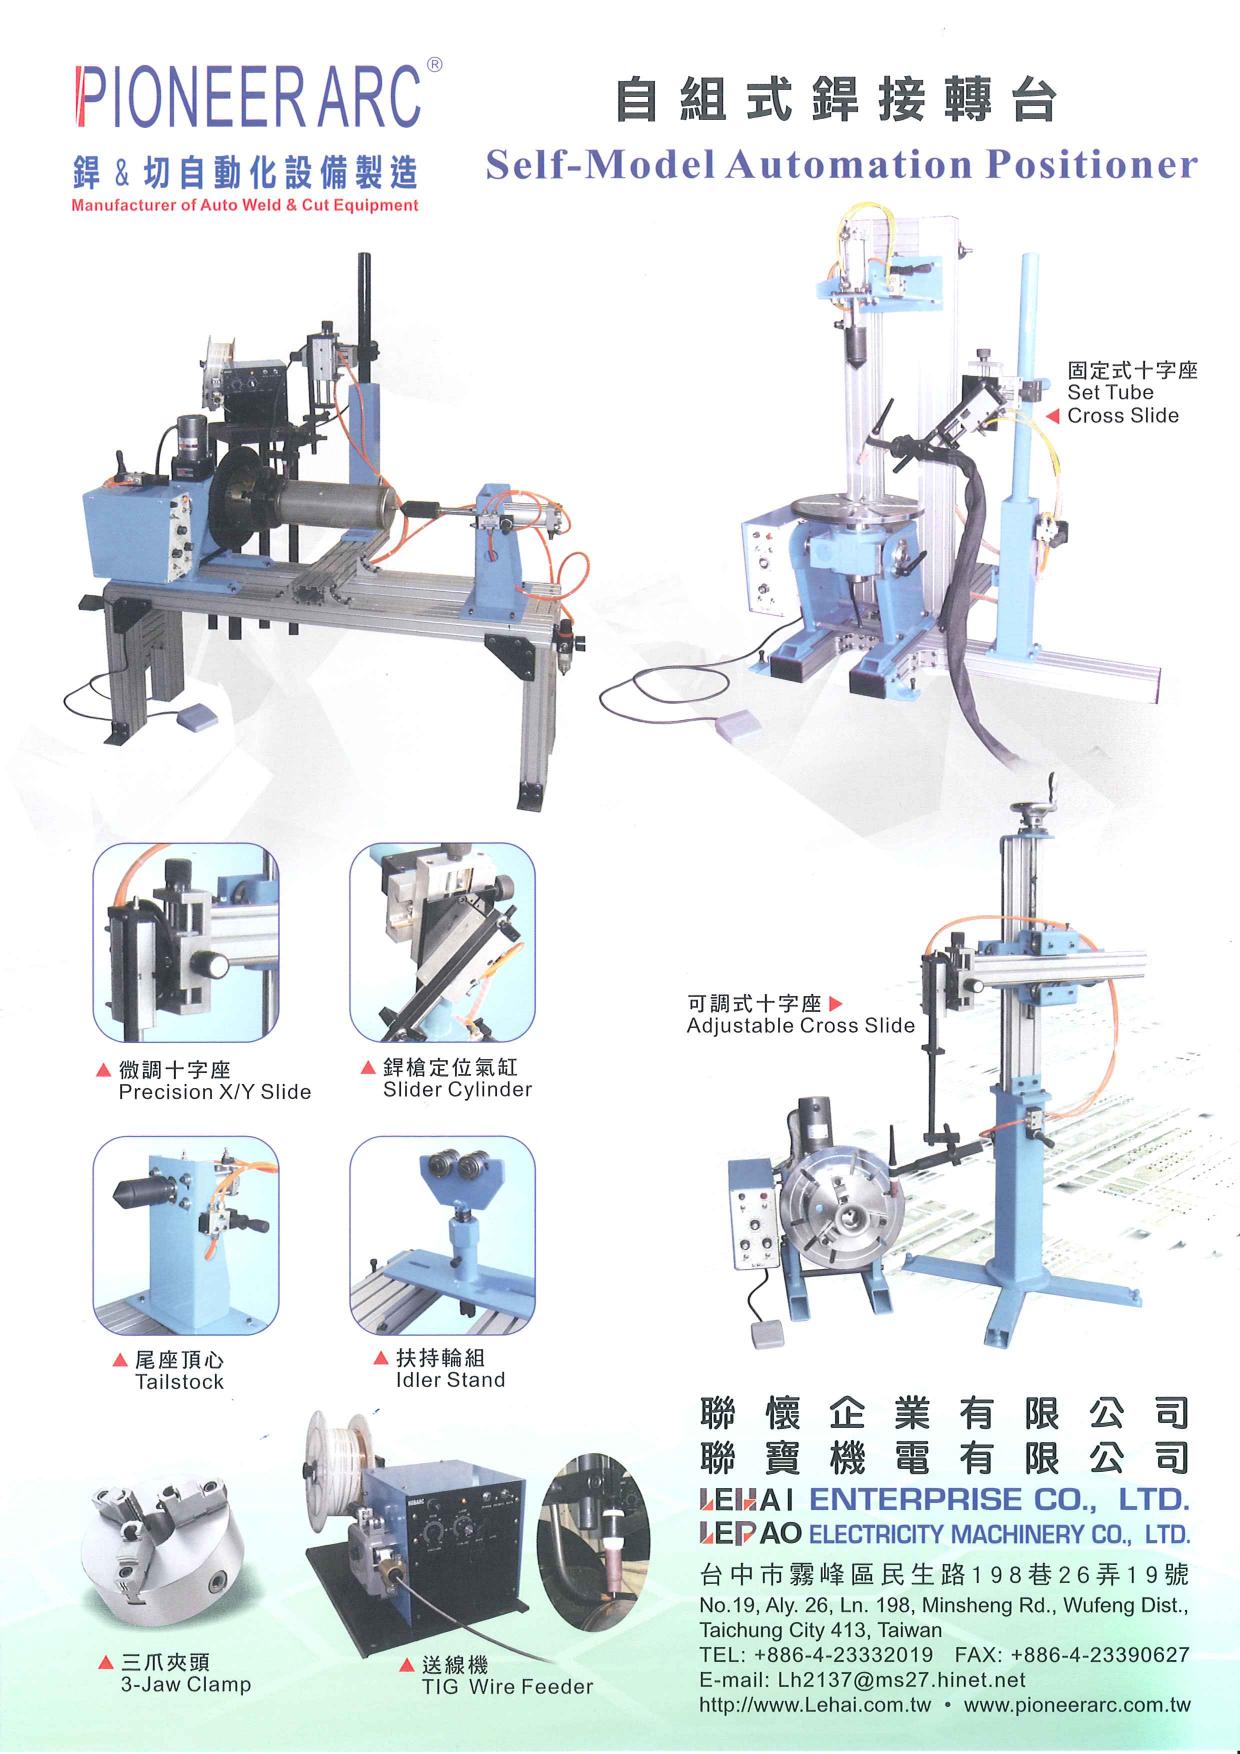 Self-Model Automation Positioner-自組式銲接轉台(Self-Model Automation Positioner)